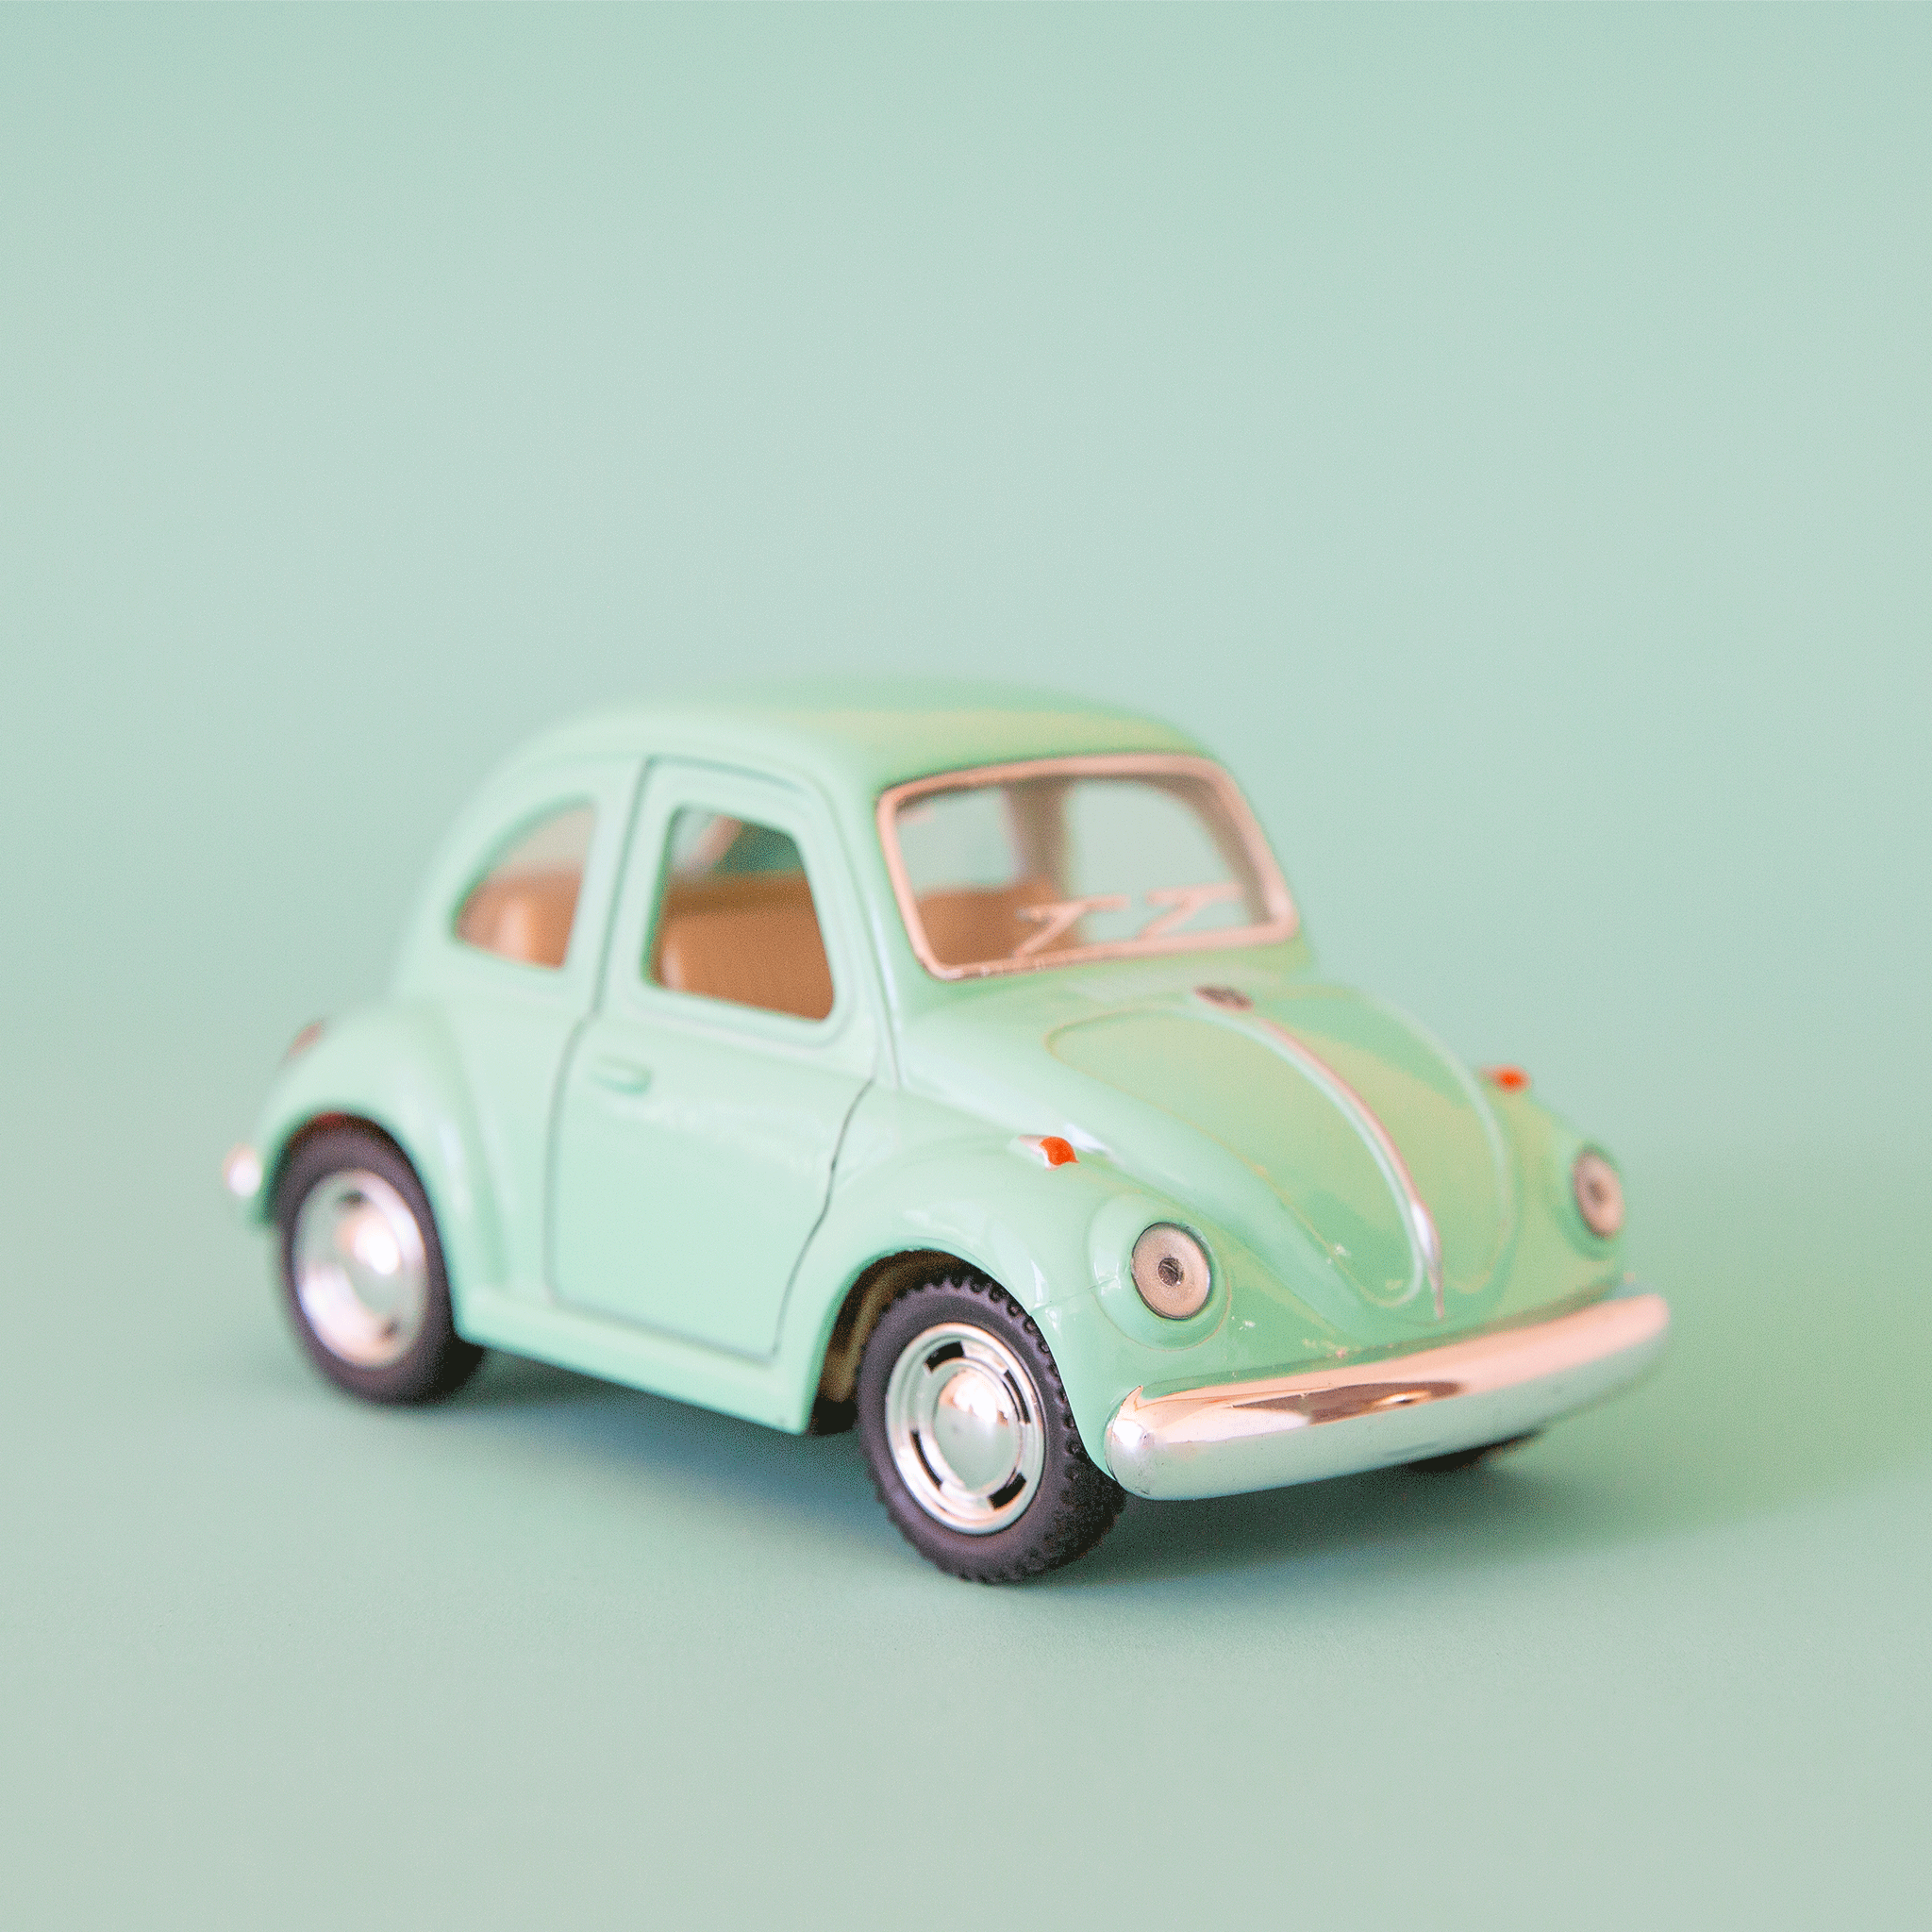 On a green background is a pastel green mini vw bug toy. 